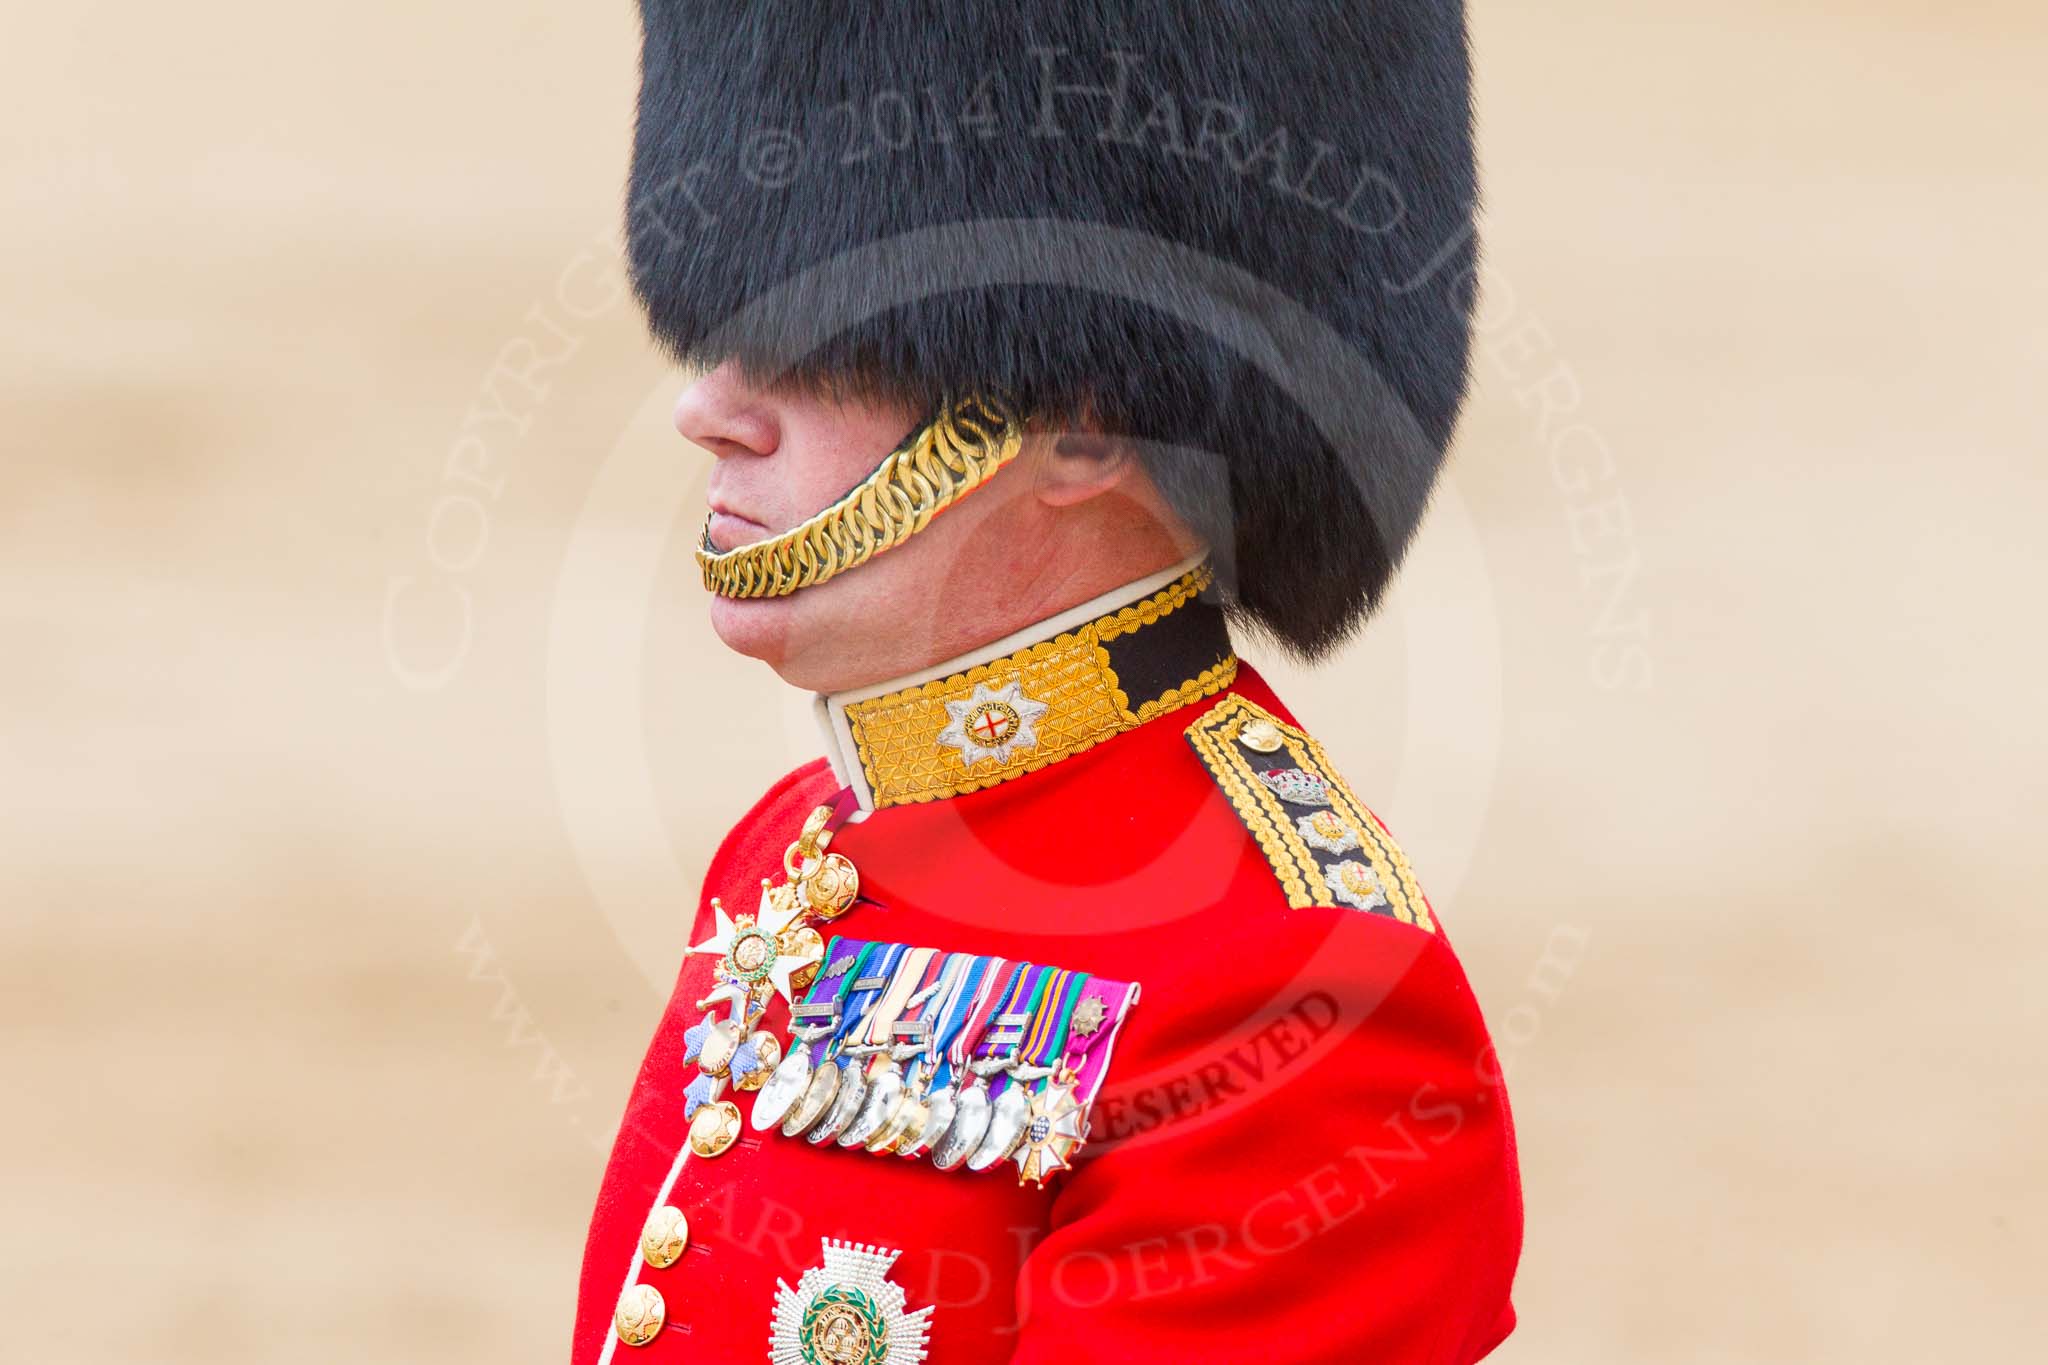 Trooping the Colour 2014.
Horse Guards Parade, Westminster,
London SW1A,

United Kingdom,
on 14 June 2014 at 12:13, image #898